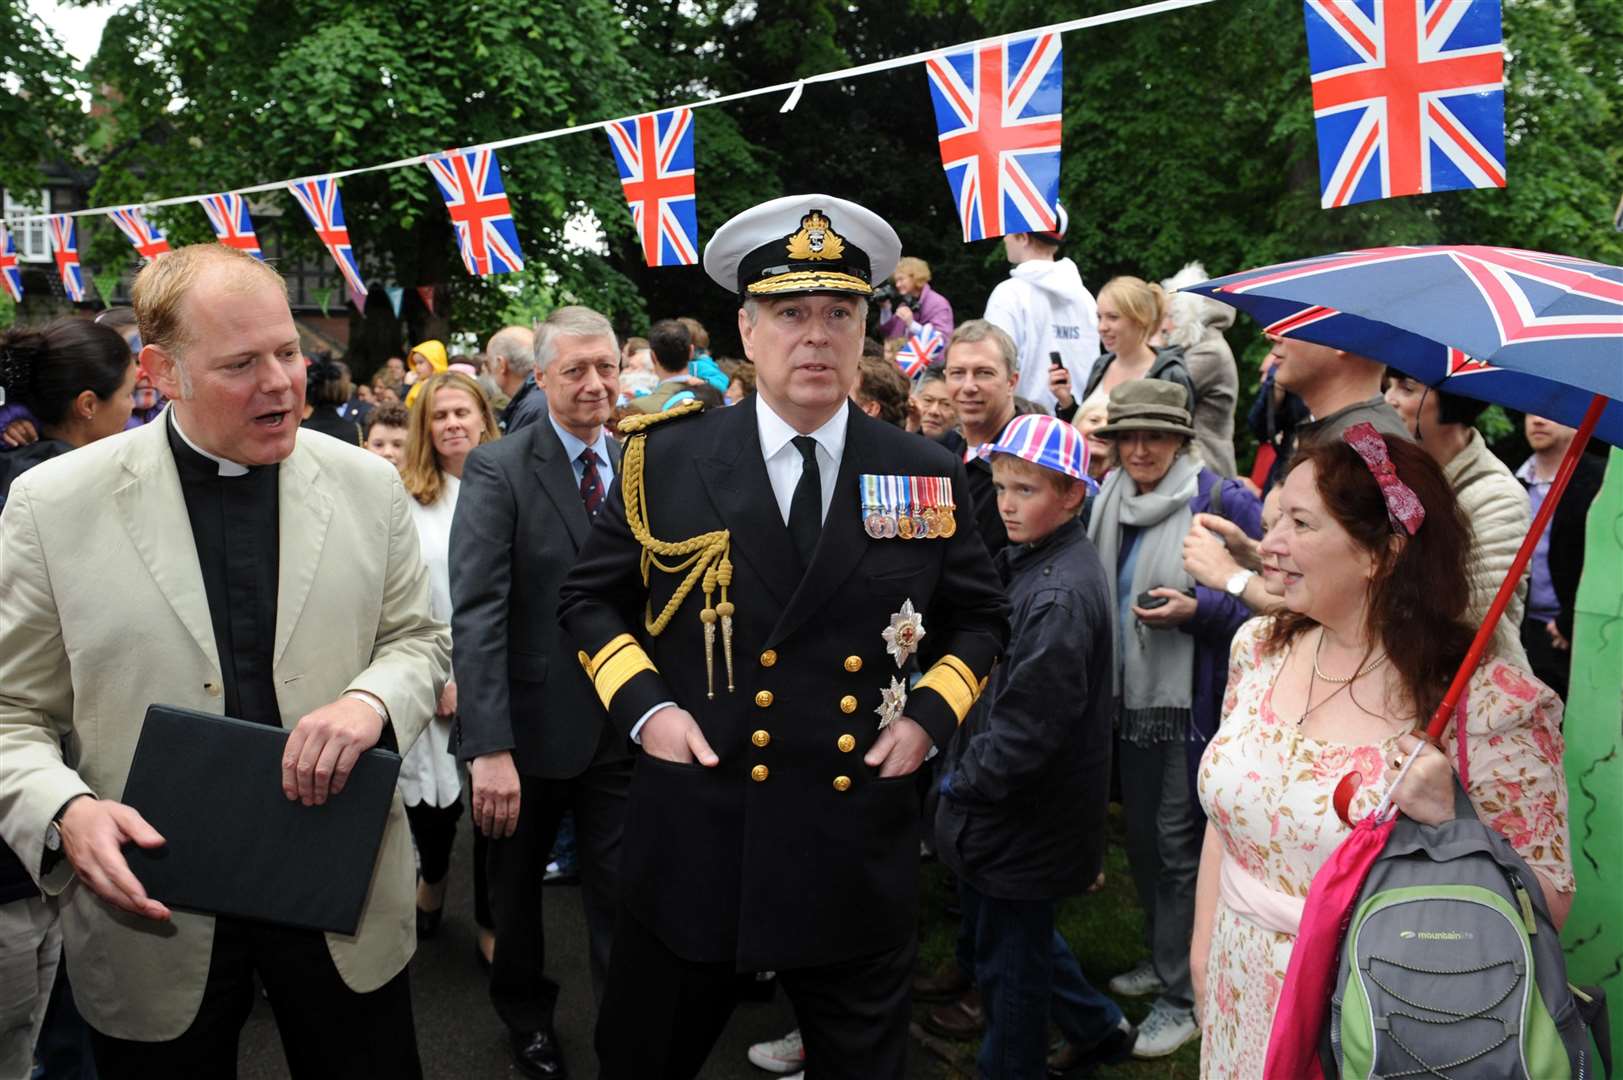 The Duke of York visiting a Big Jubilee Lunch at All Saints Church, Fulham, as part of the Diamond Jubilee celebrations in 2012 (Matt Grayson/Fulham Chronicle/PA)